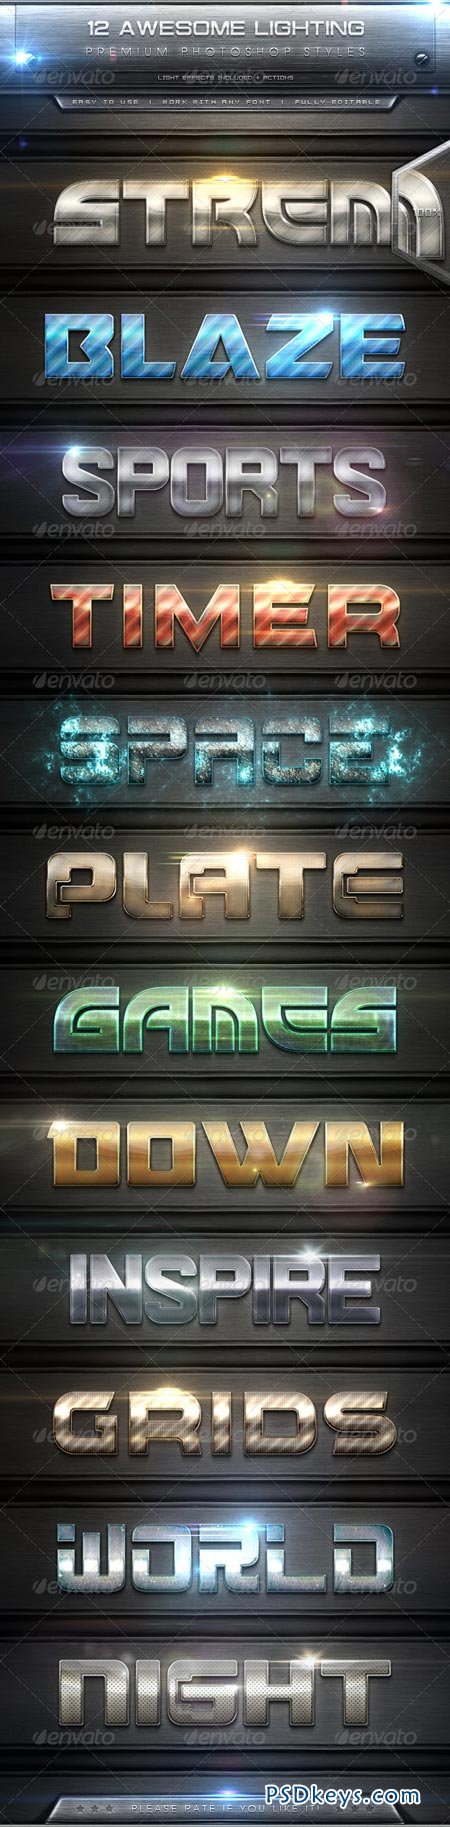 12 Awesome Lighting Text Effect Styles + Actions 7932807